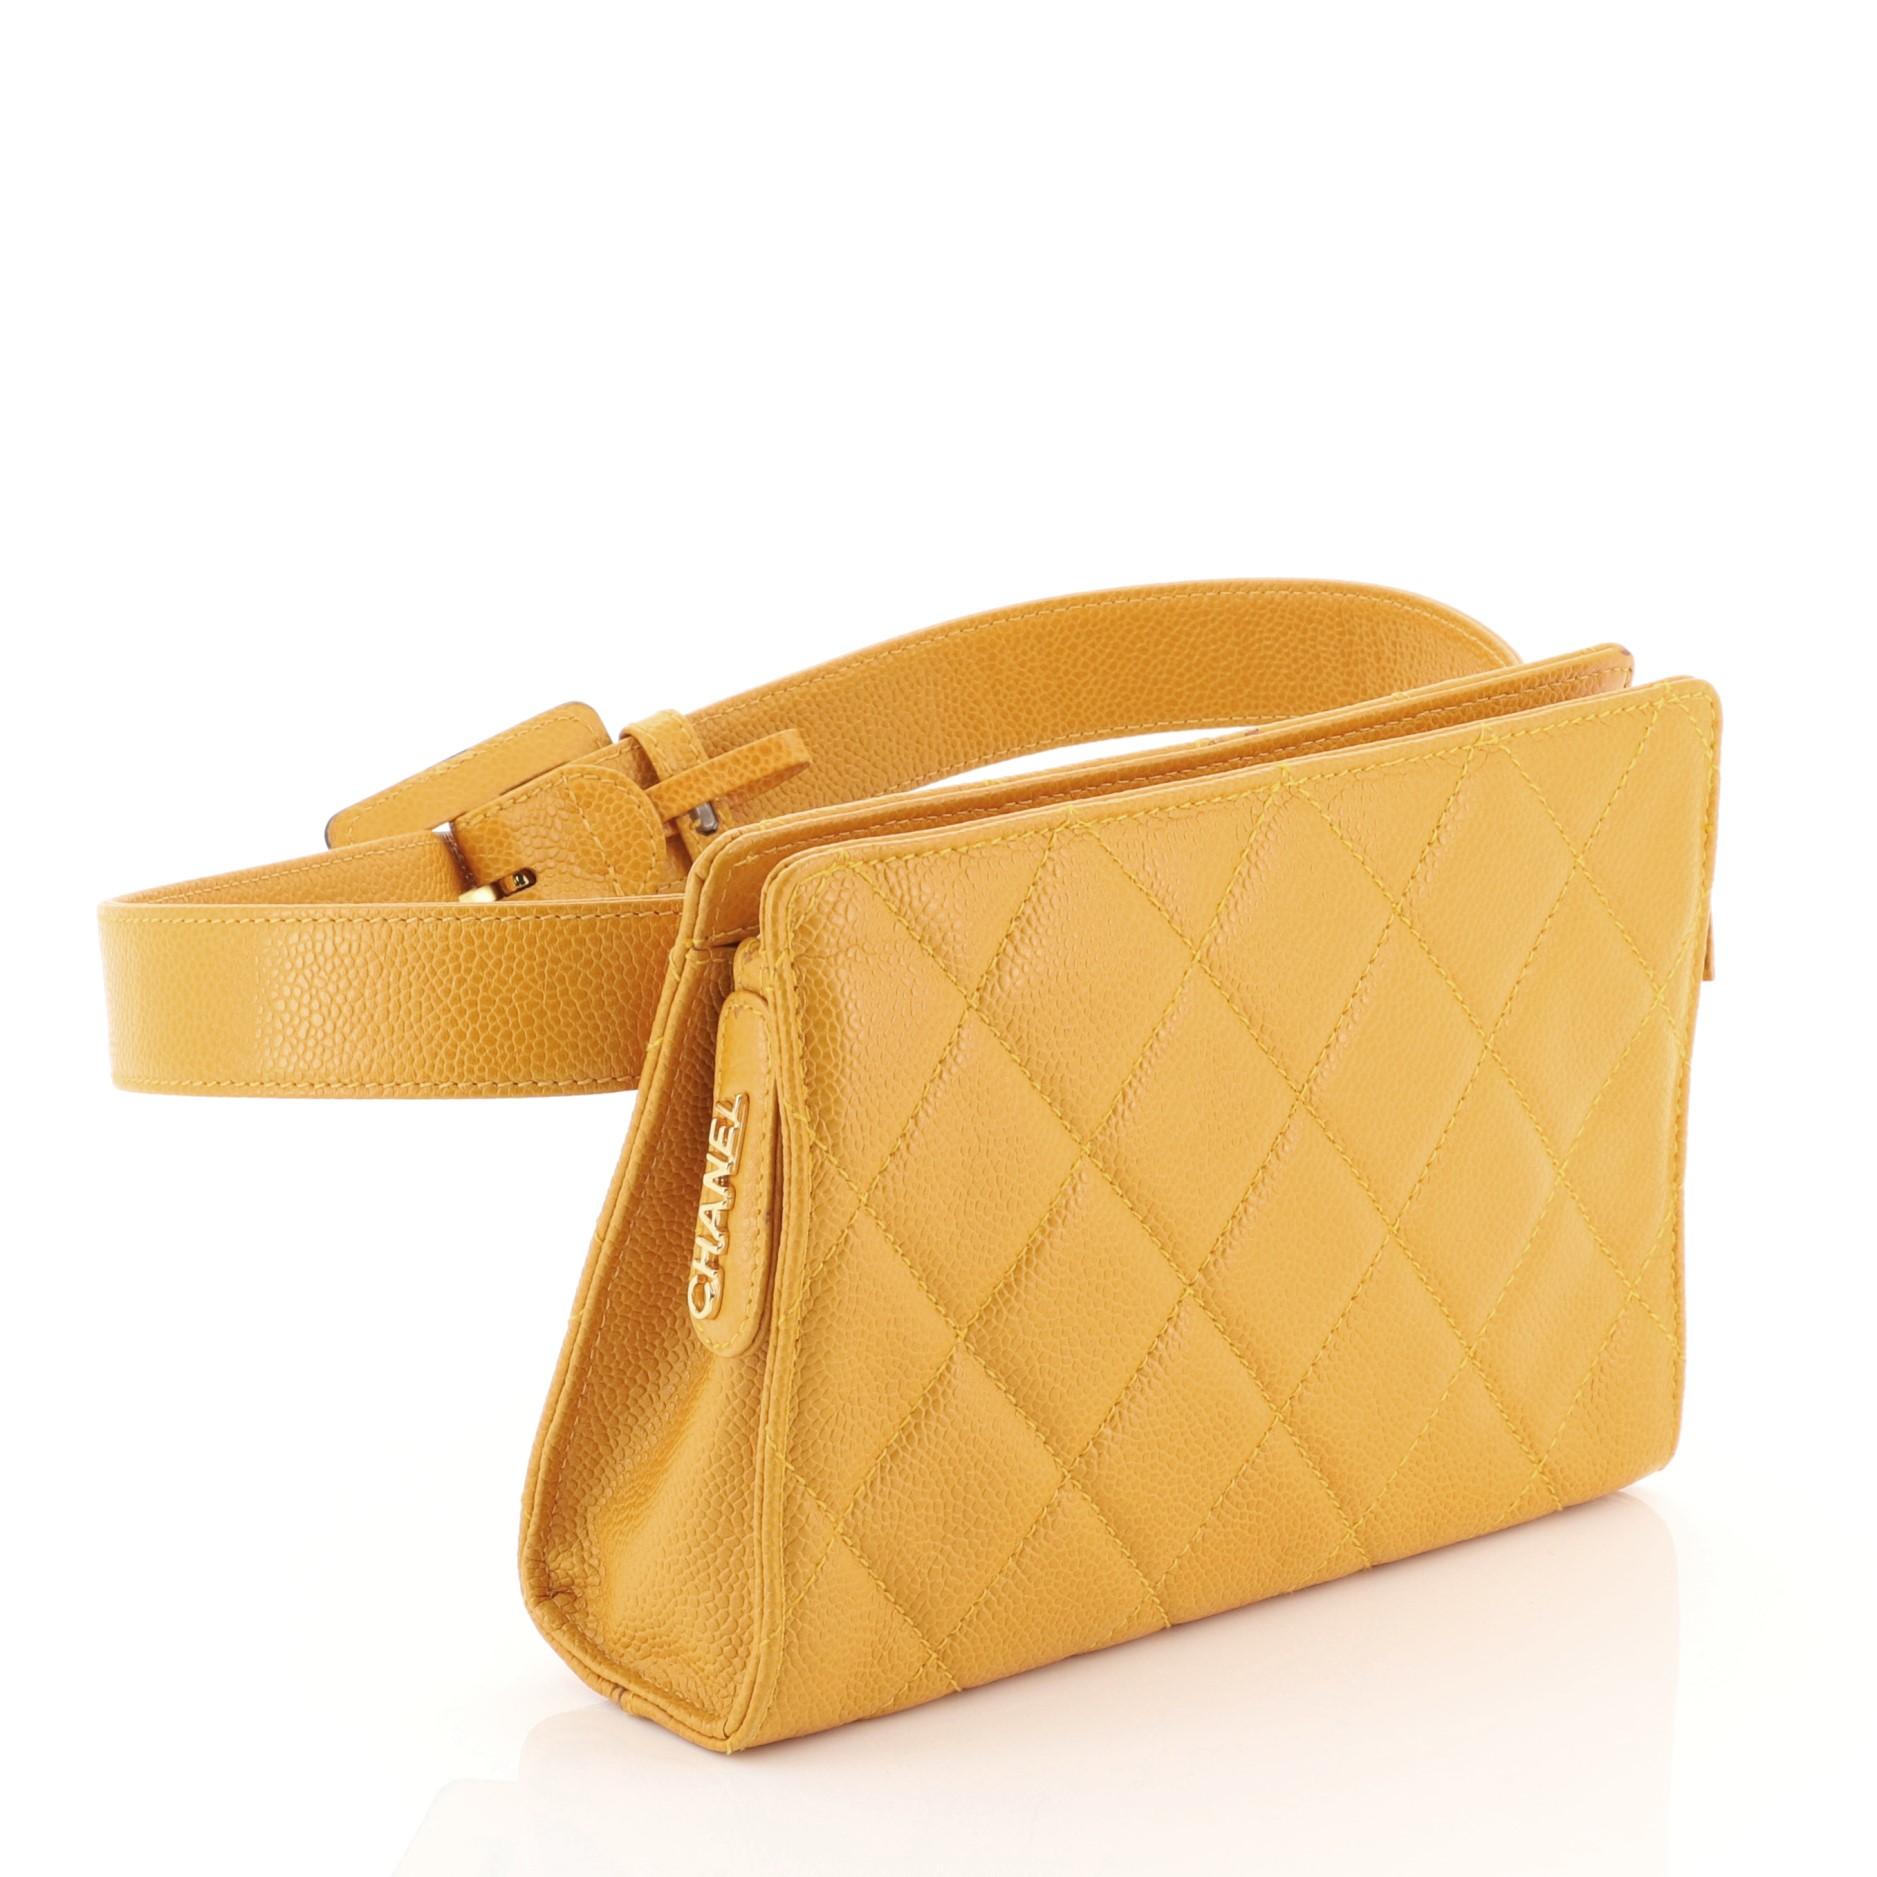 This Chanel Vintage Zip Belt Bag Quilted Caviar Small, crafted in yellow quilted caviar leather, features an adjustable leather belt strap and gold-tone hardware. Its zip closure opens to a neutral fabric interior. Hologram sticker reads: 4108318.